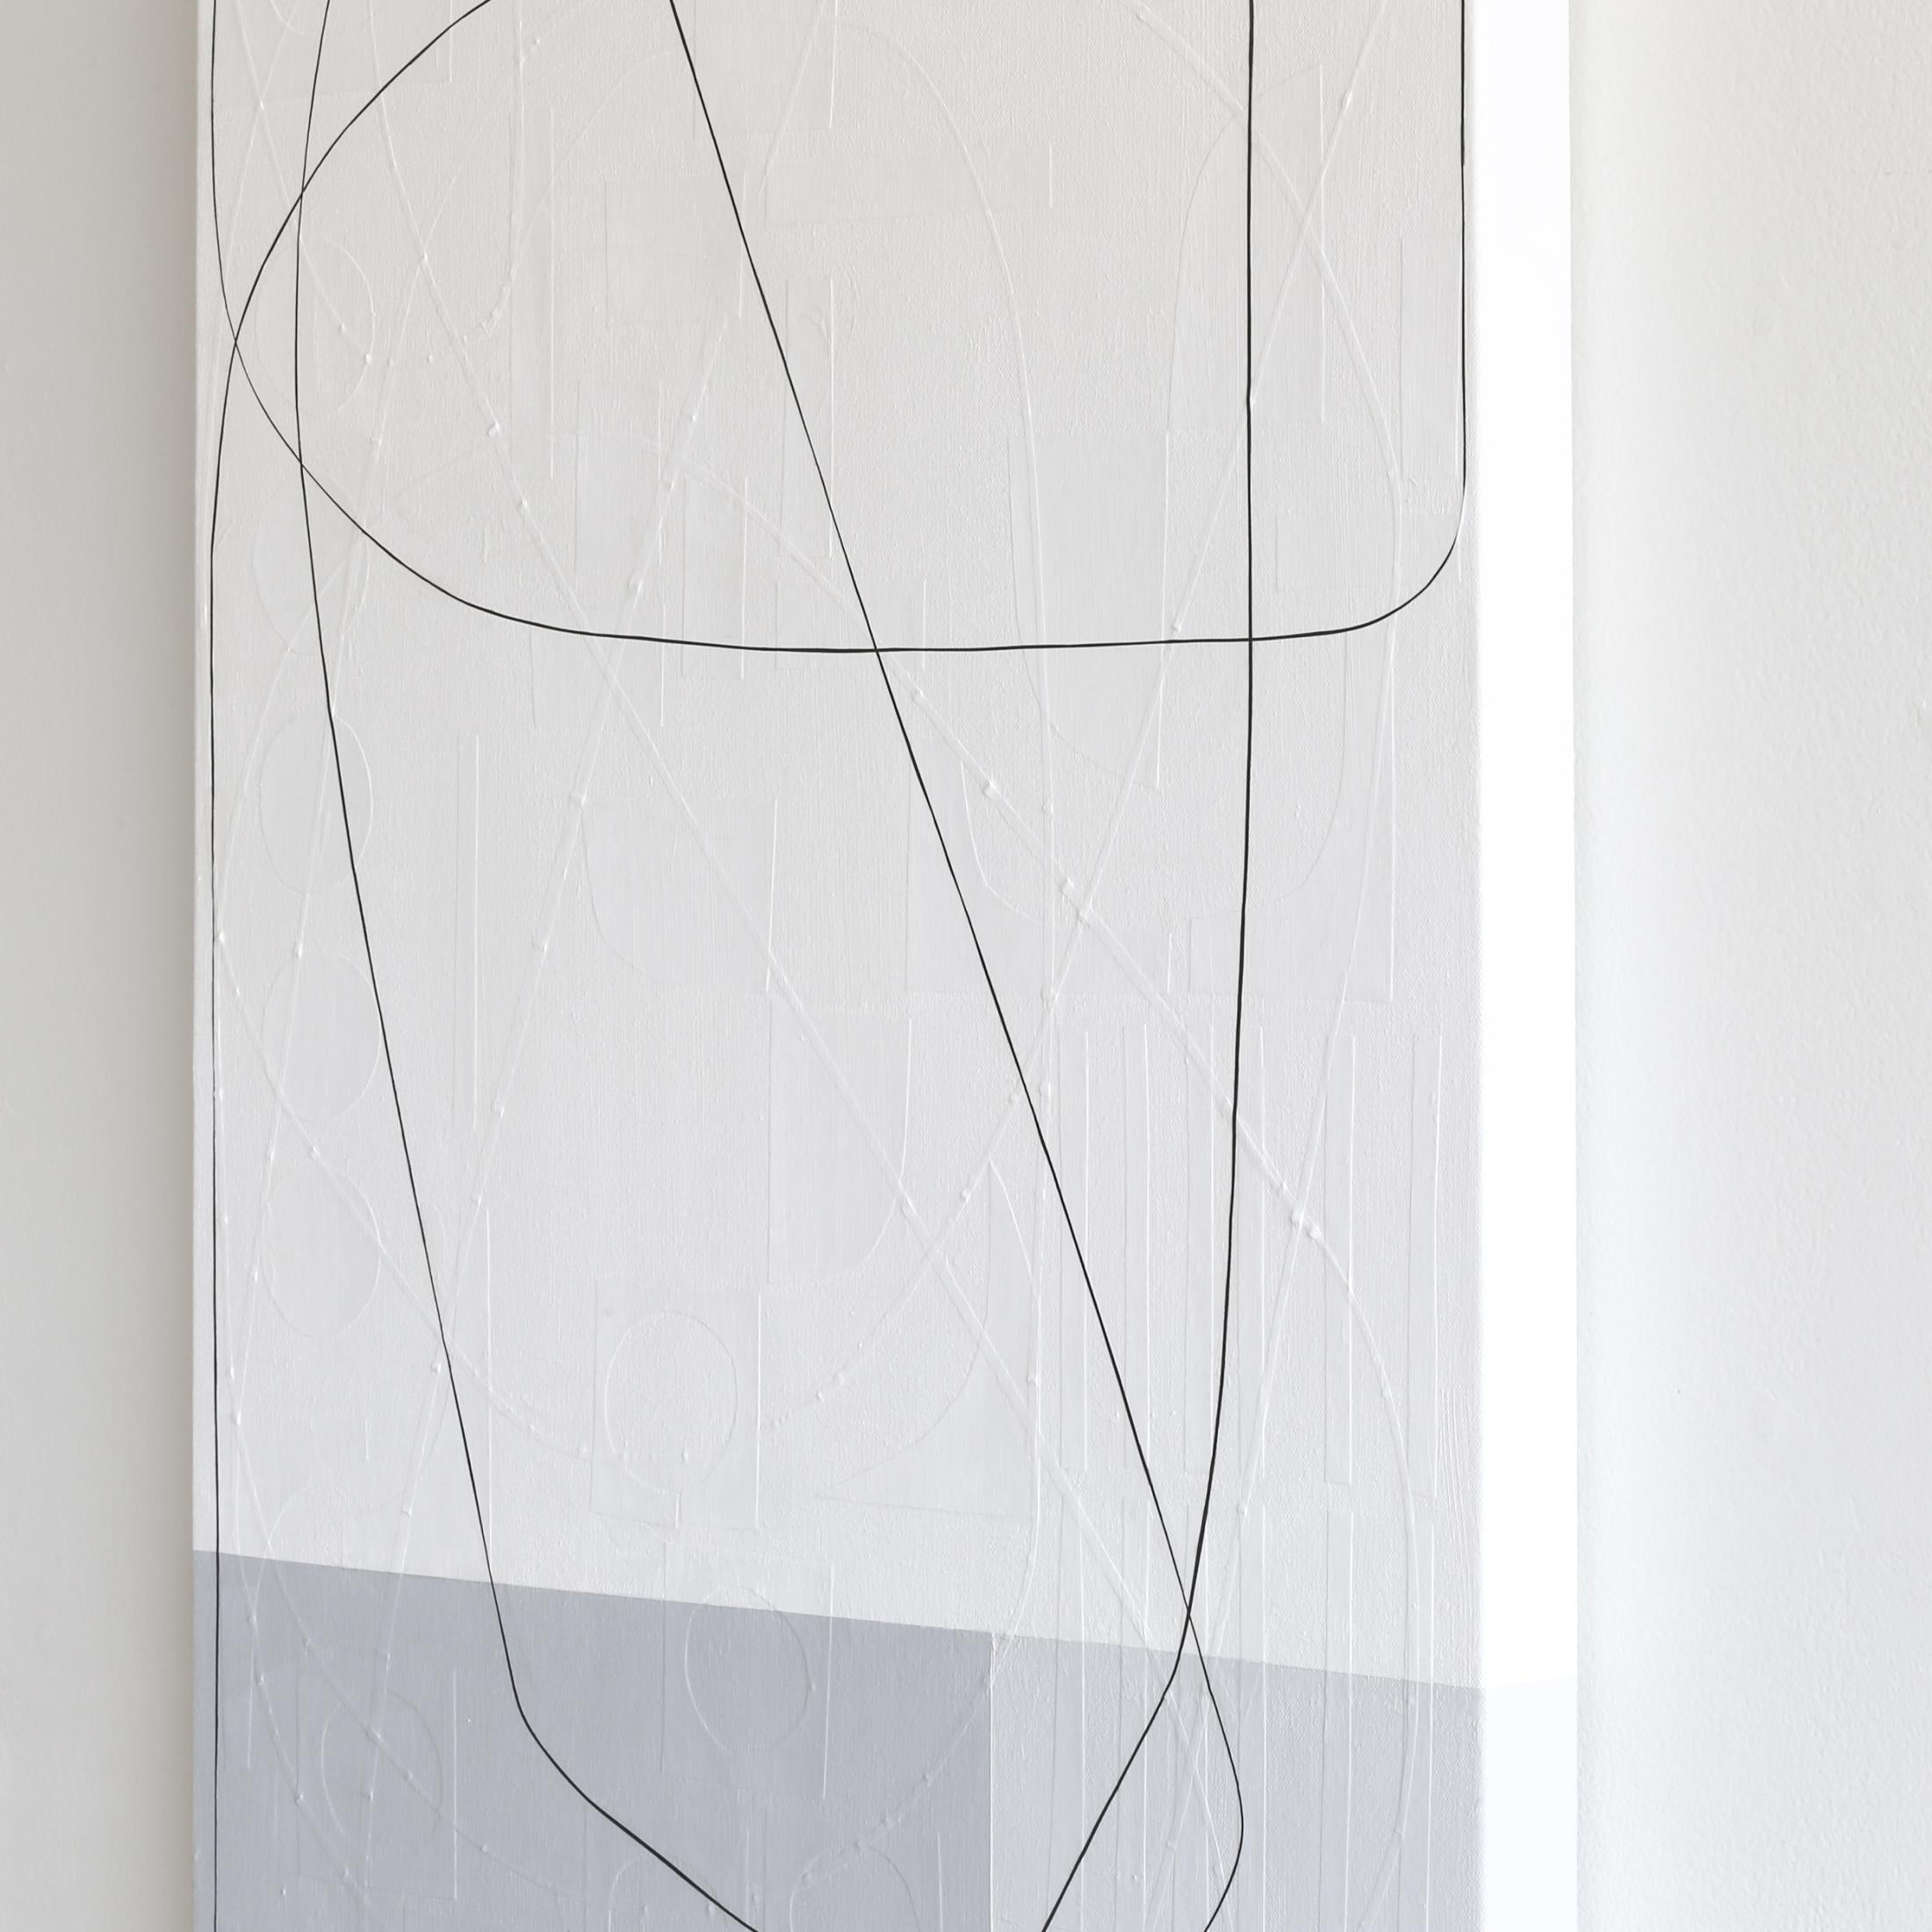 Maura Segal’s abstract works conjure a delicate simplicity. Blocks of color languidly splay behind thin meandering lines and freeform fluid curves. Yet upon closer investigation, the artist’s focal craftsmanship is revealed by the foundational